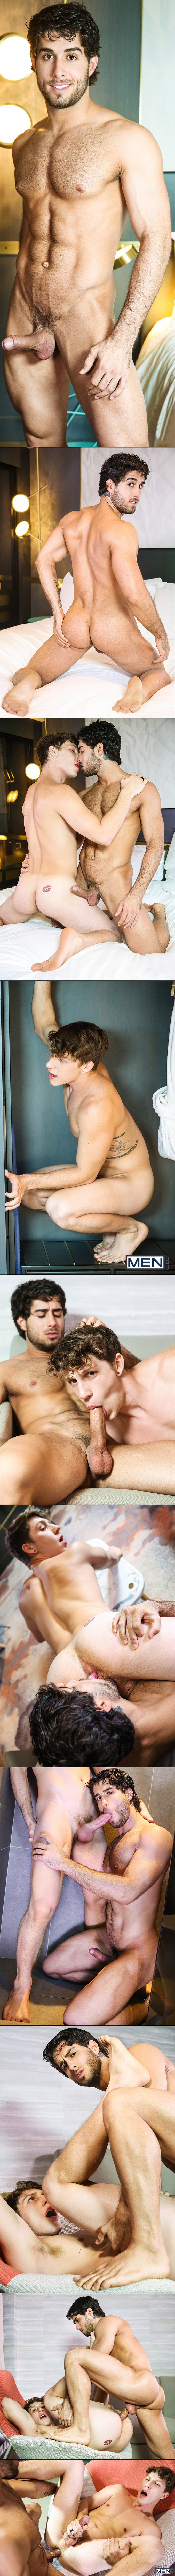 Stealth Fuckers Part 8 - PHOTOS - Diego Sans and Paul Cannon - STG - Str8 to Gay closeup male feet gay porn